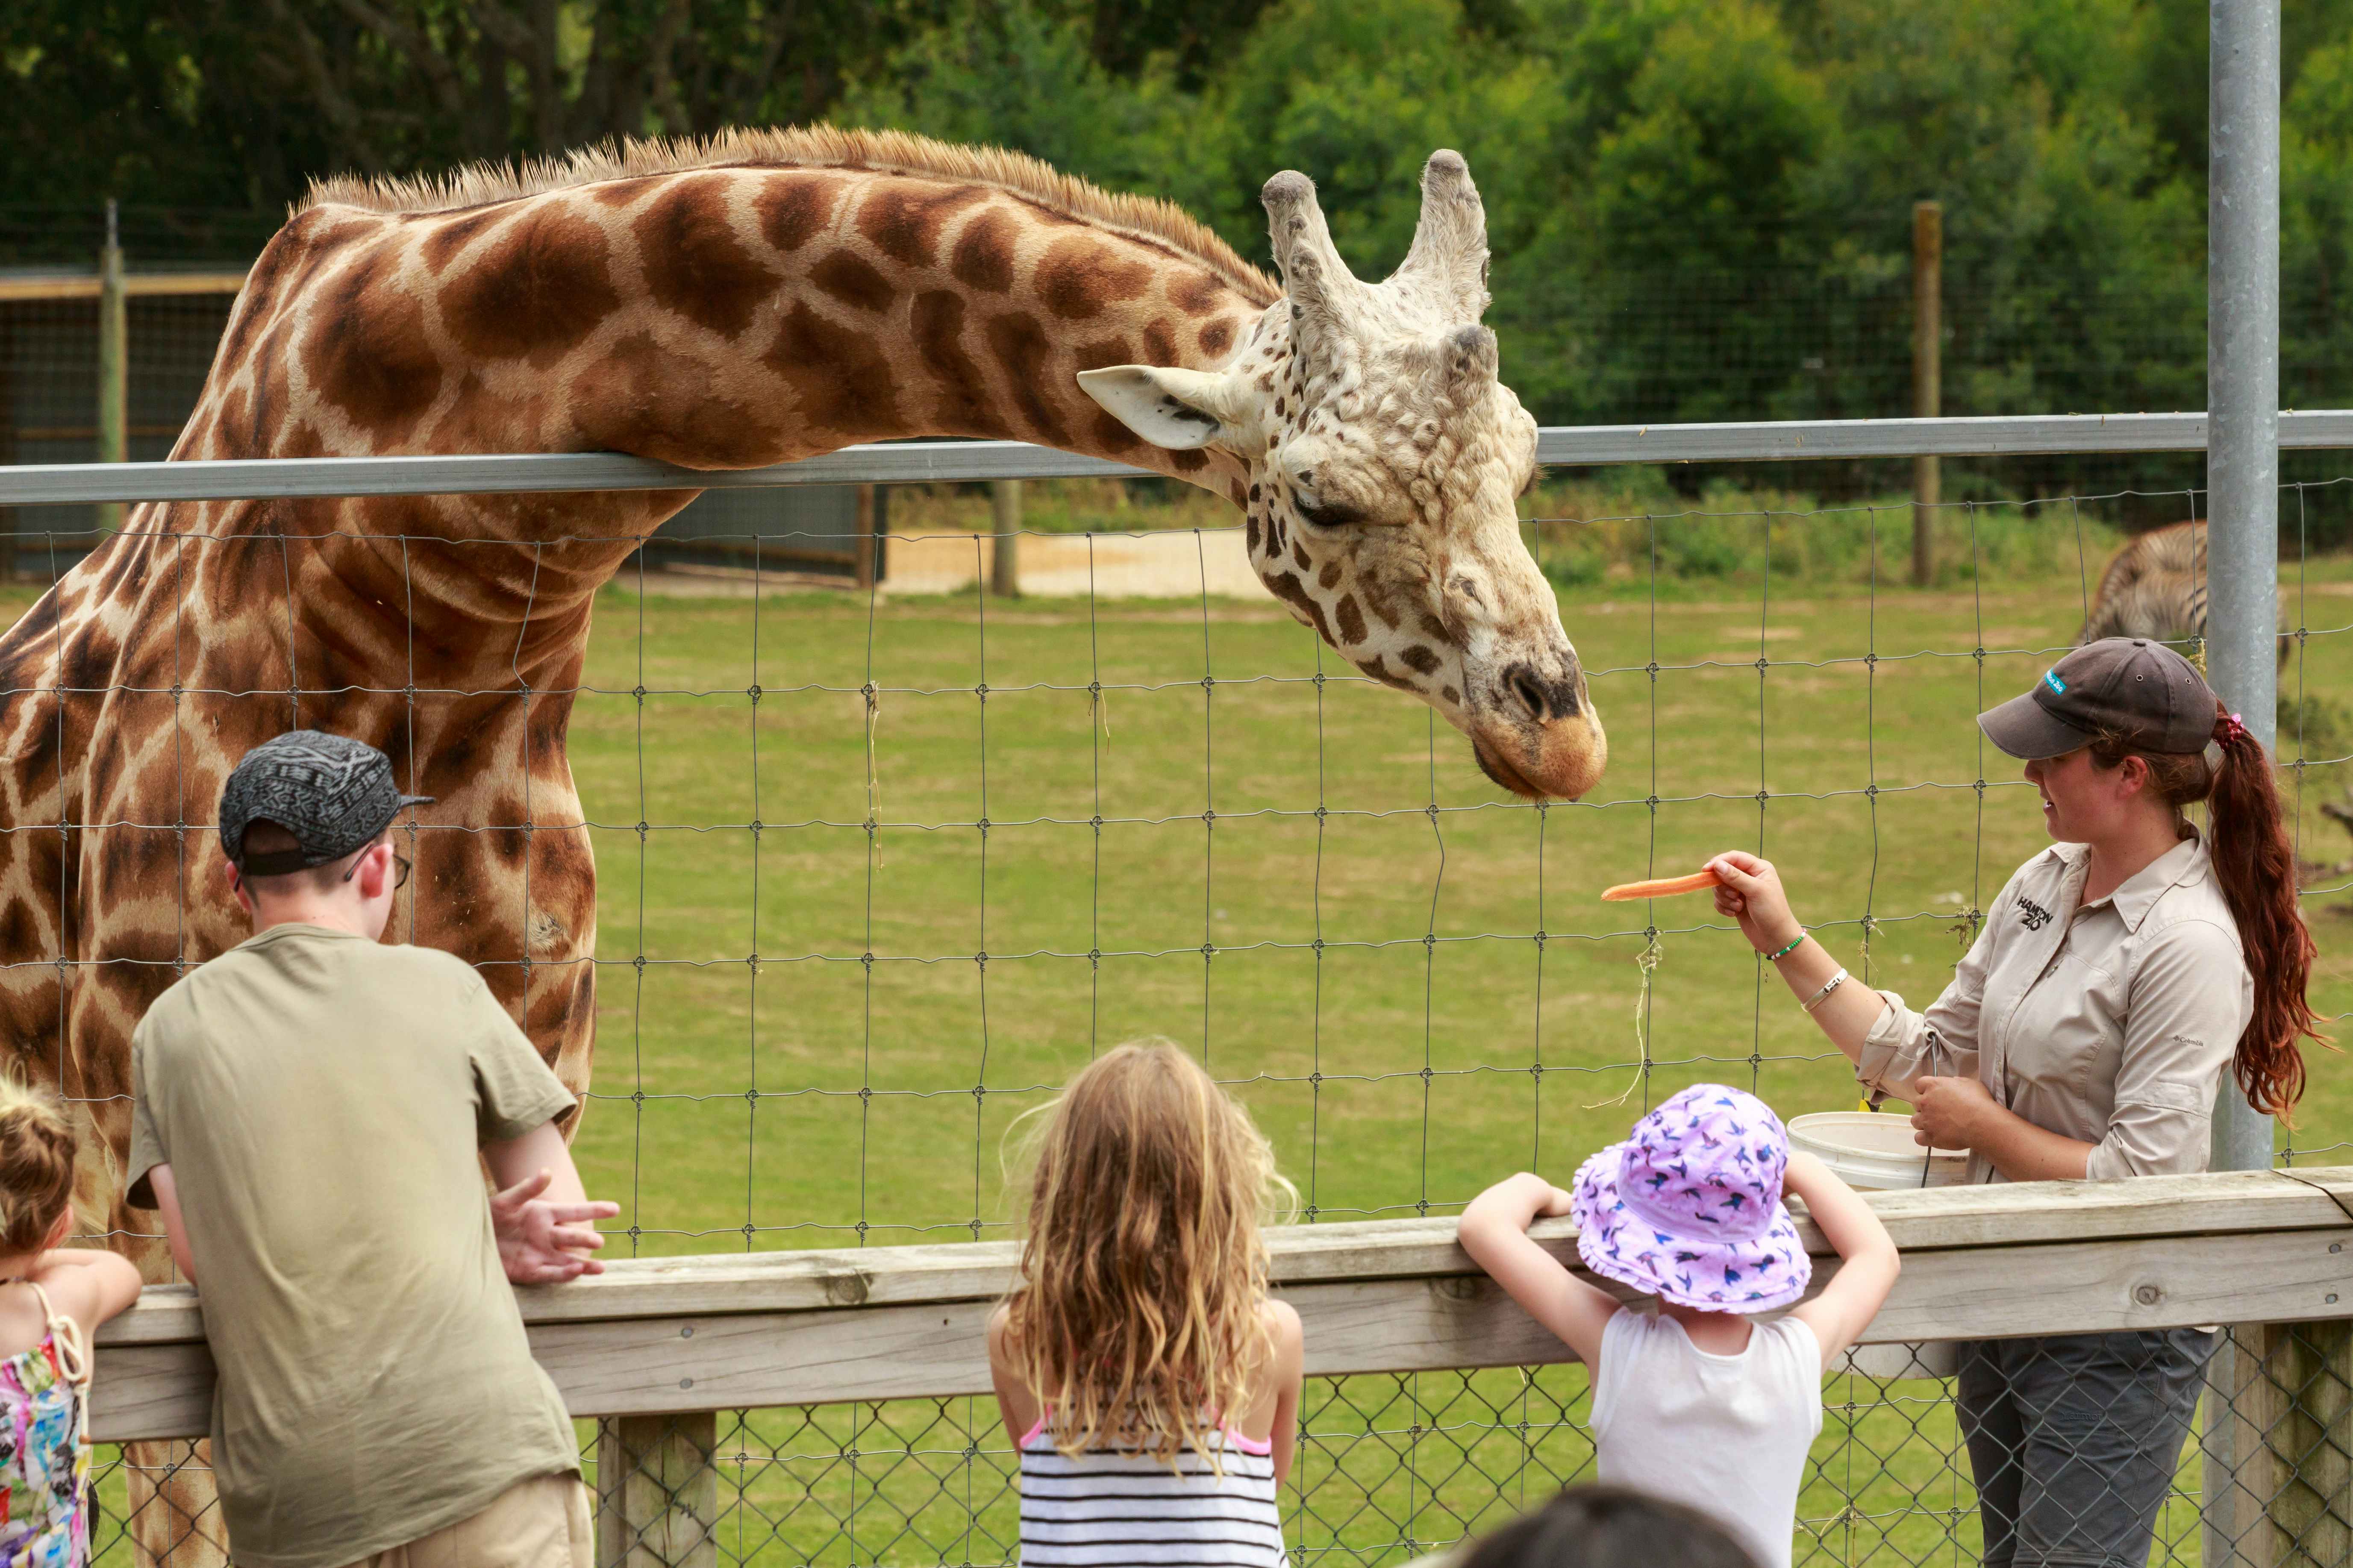 A parent and two children at the zoo, watching a zookeeper feeding a carrot to a giraffe.